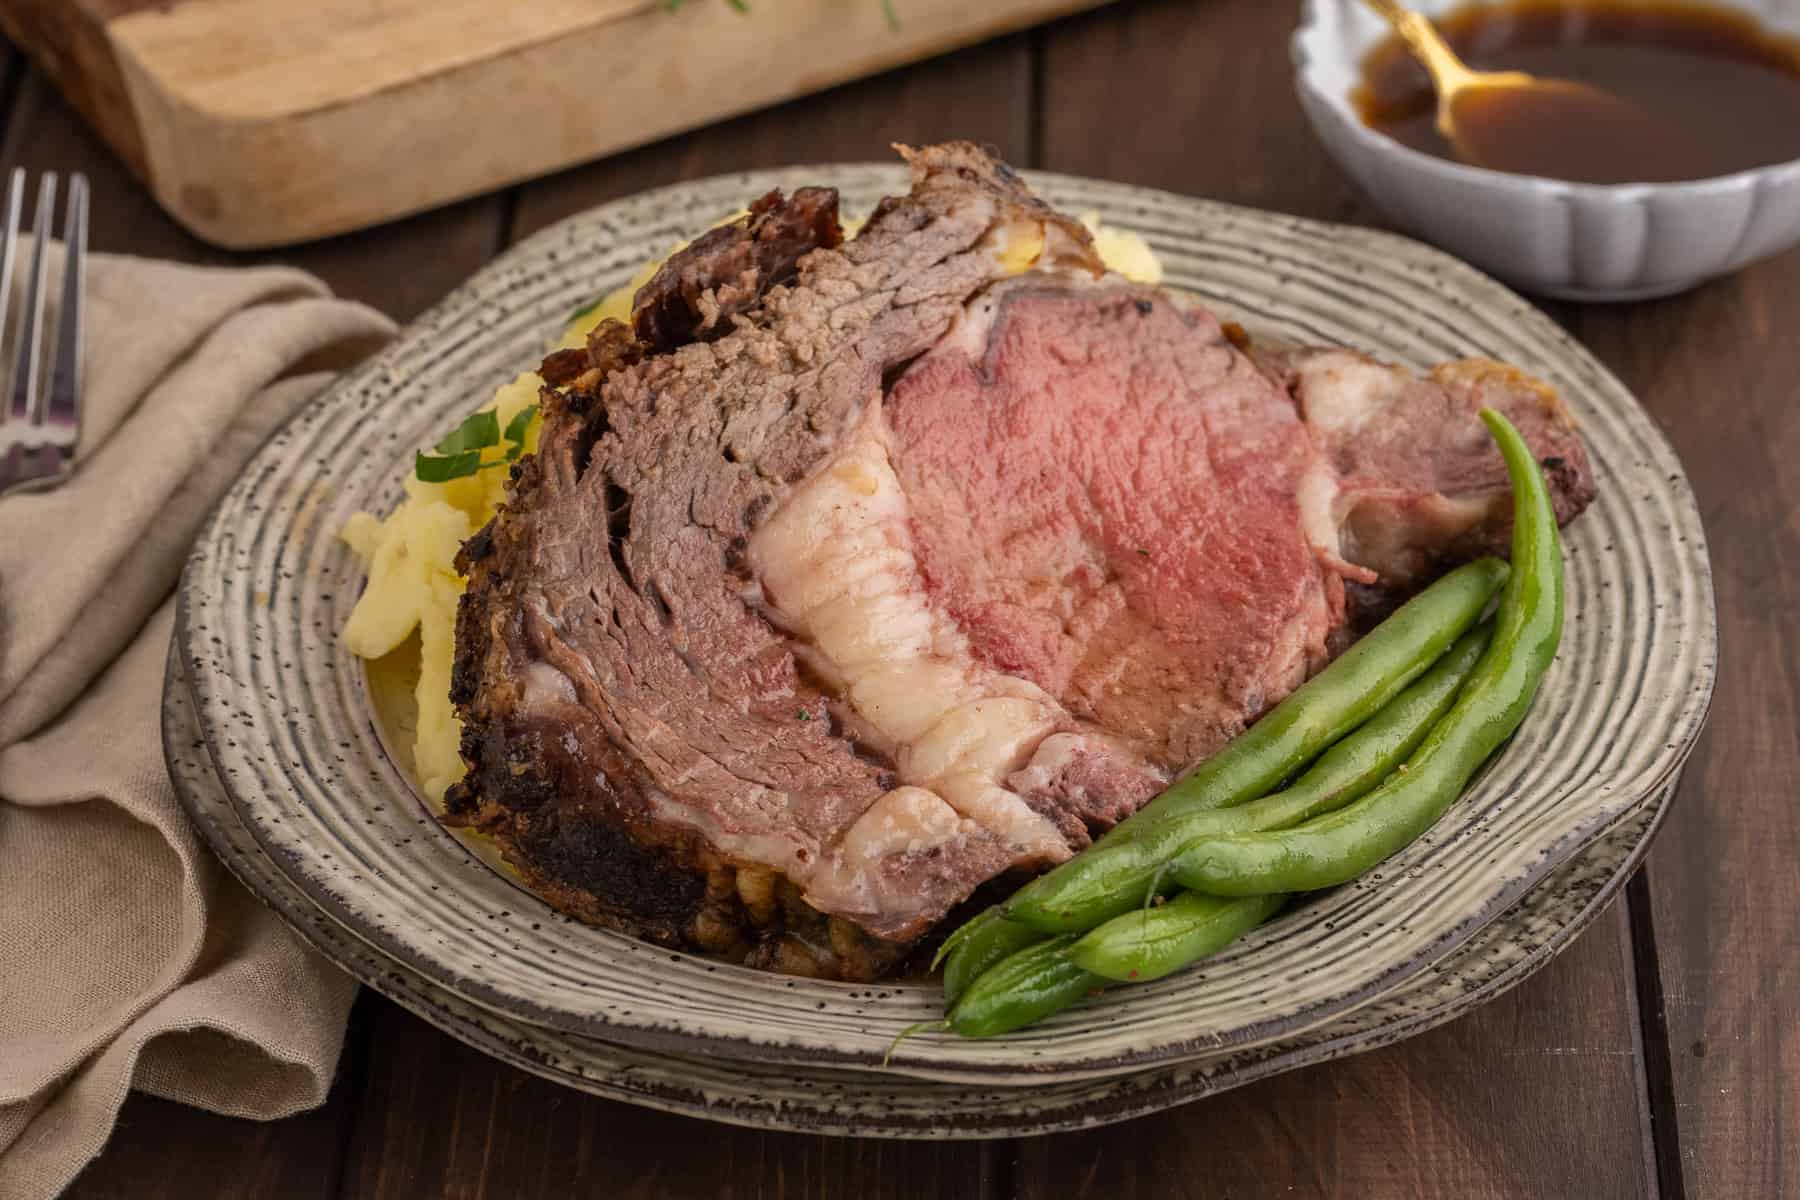 A delicious standing rib roast dinner set on a wooden table with a bowl of au jus in the background.